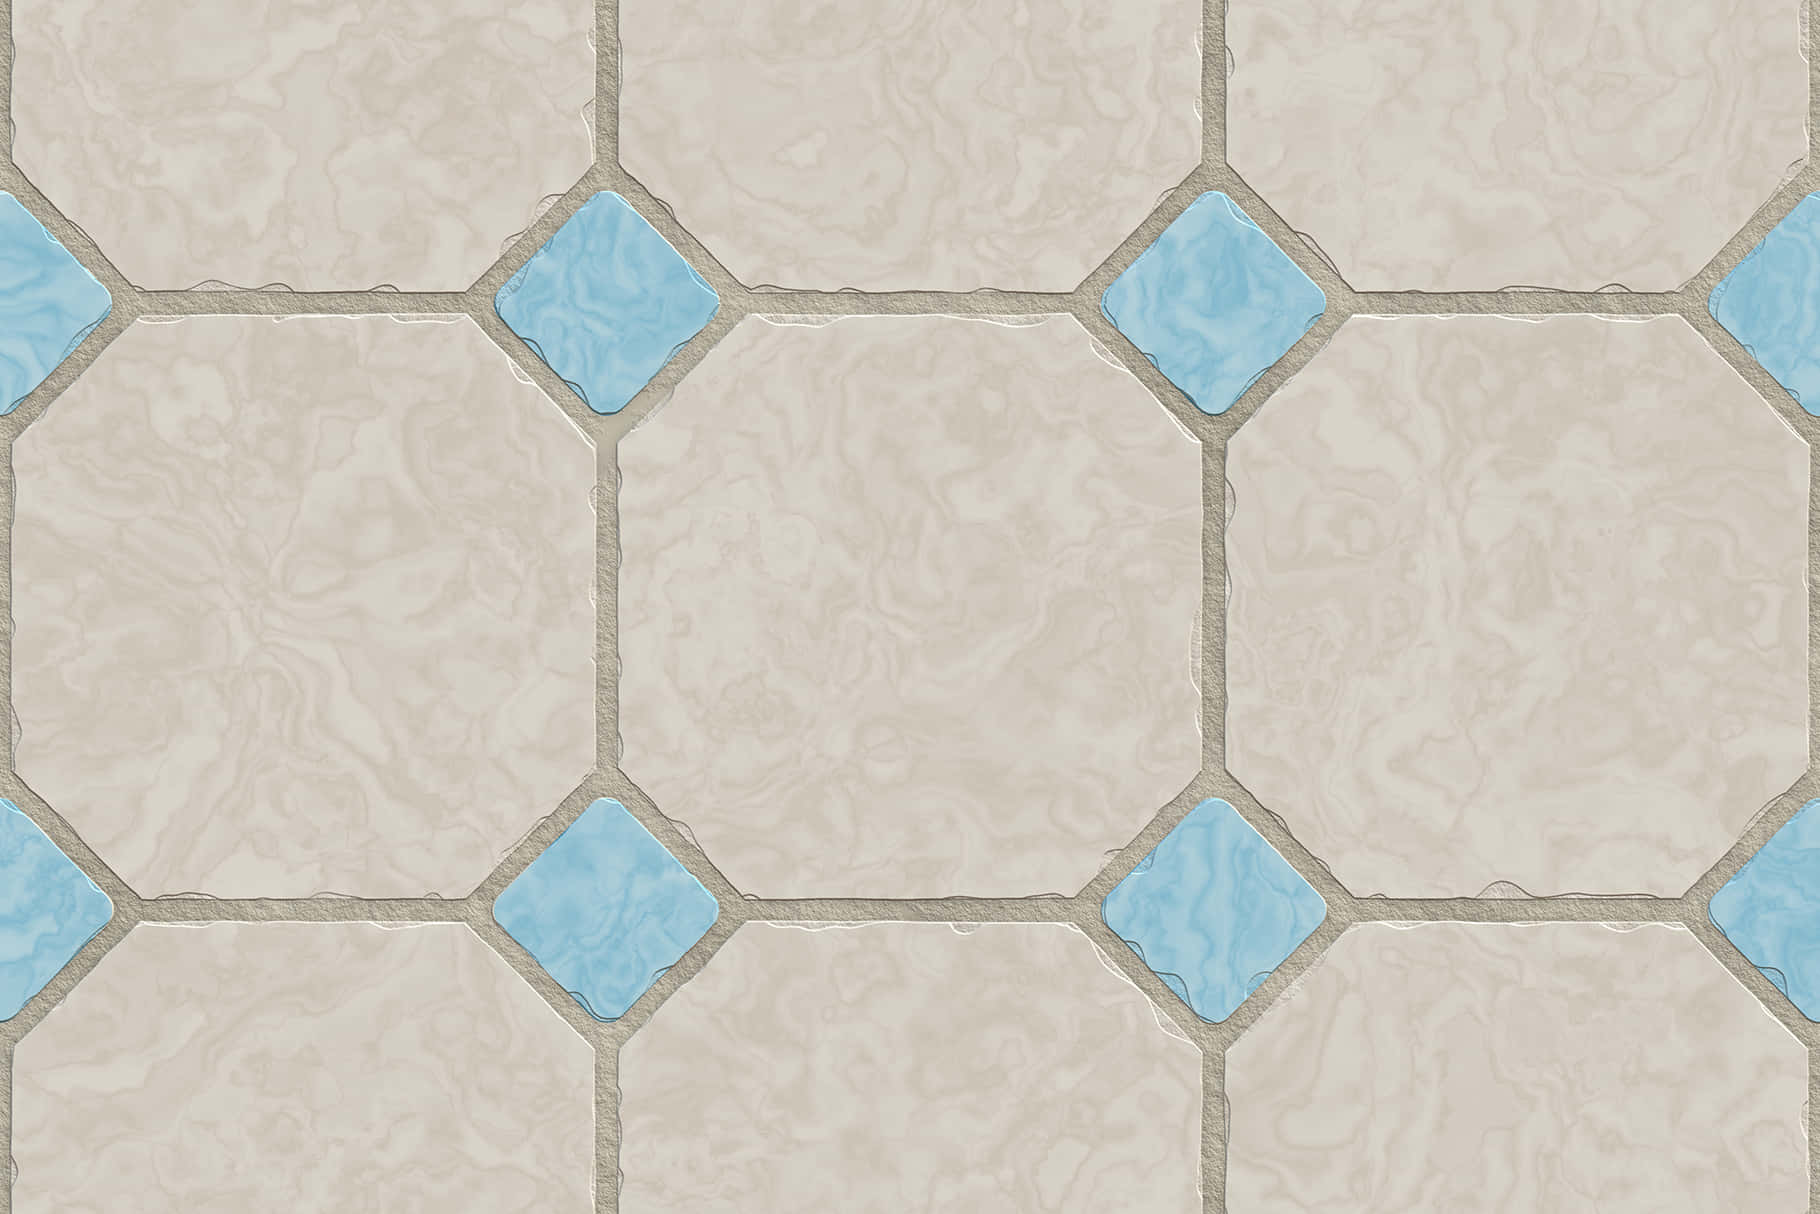 Tile Floor With Blue And White Tiles